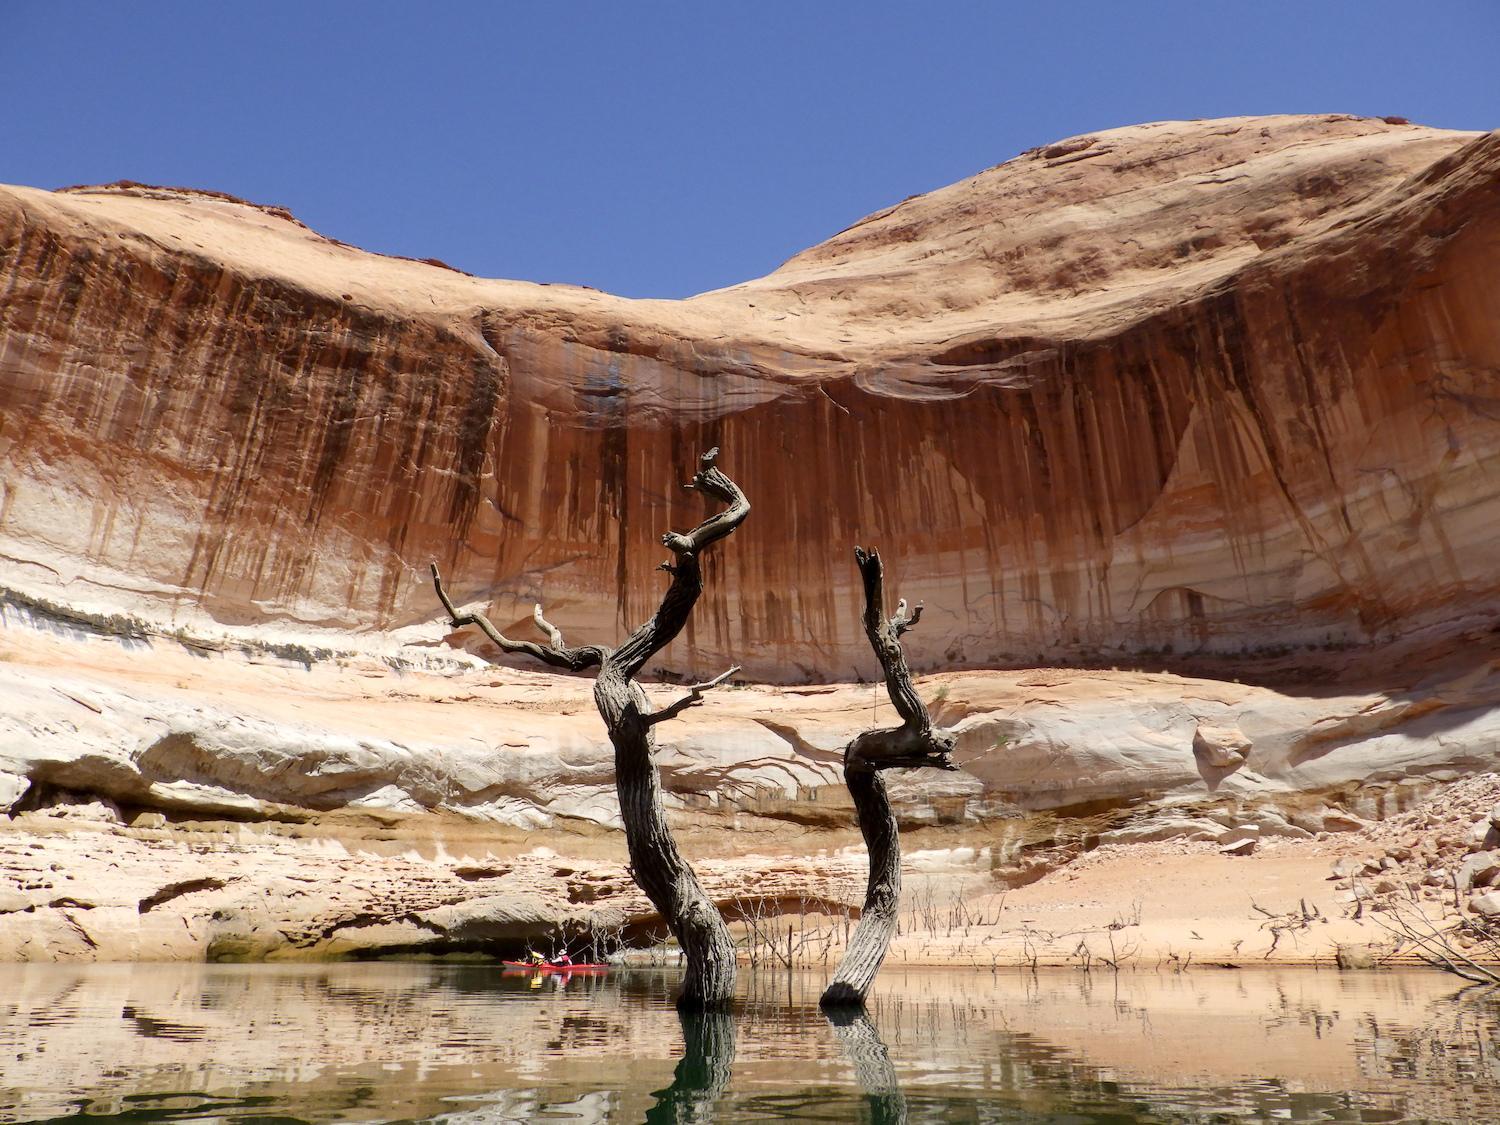 Most Americans believe climate change is harming national parks/Kurt Repanshek file of Glen Canyon NRA